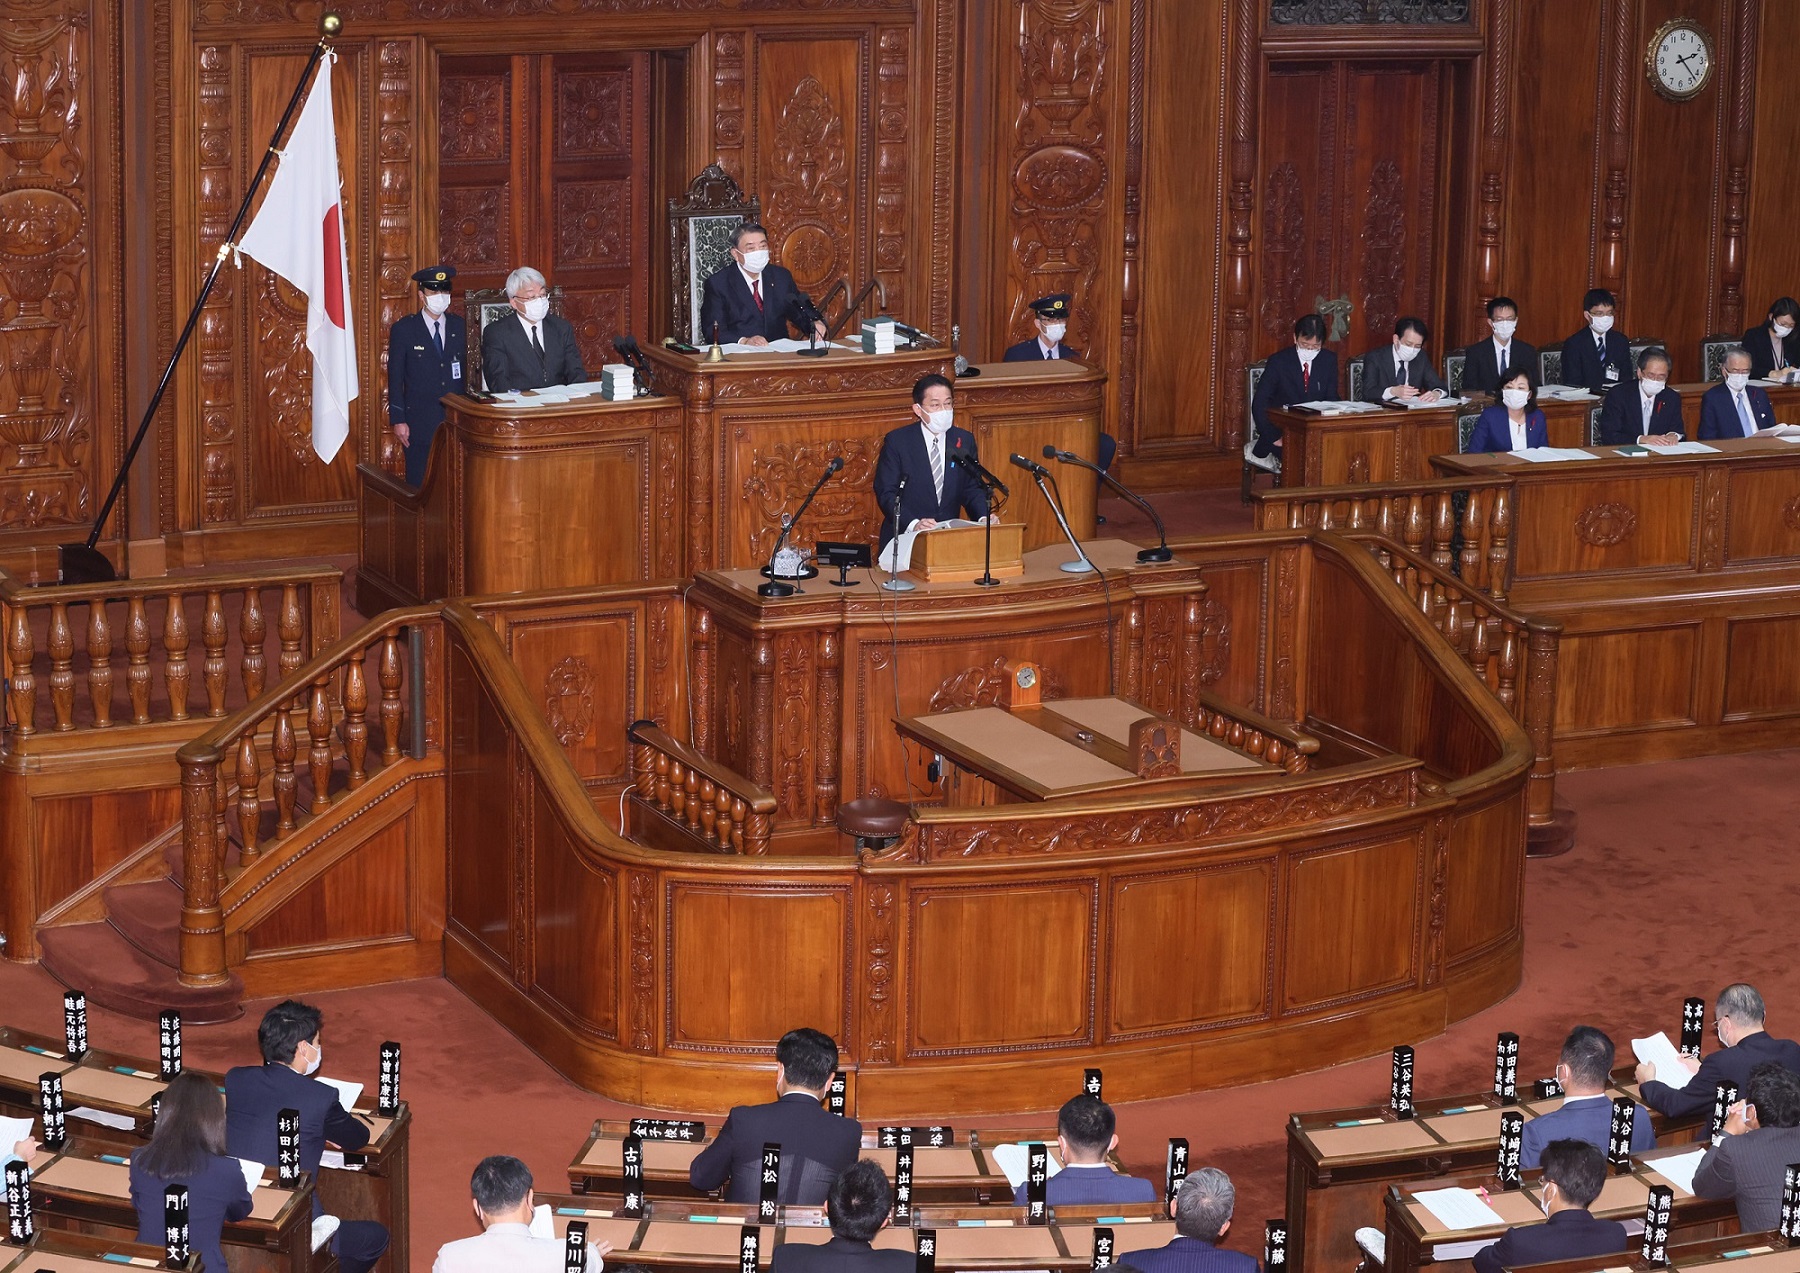 Photograph of the Prime Minister delivering a policy speech during a plenary session of the House of Representatives (7)